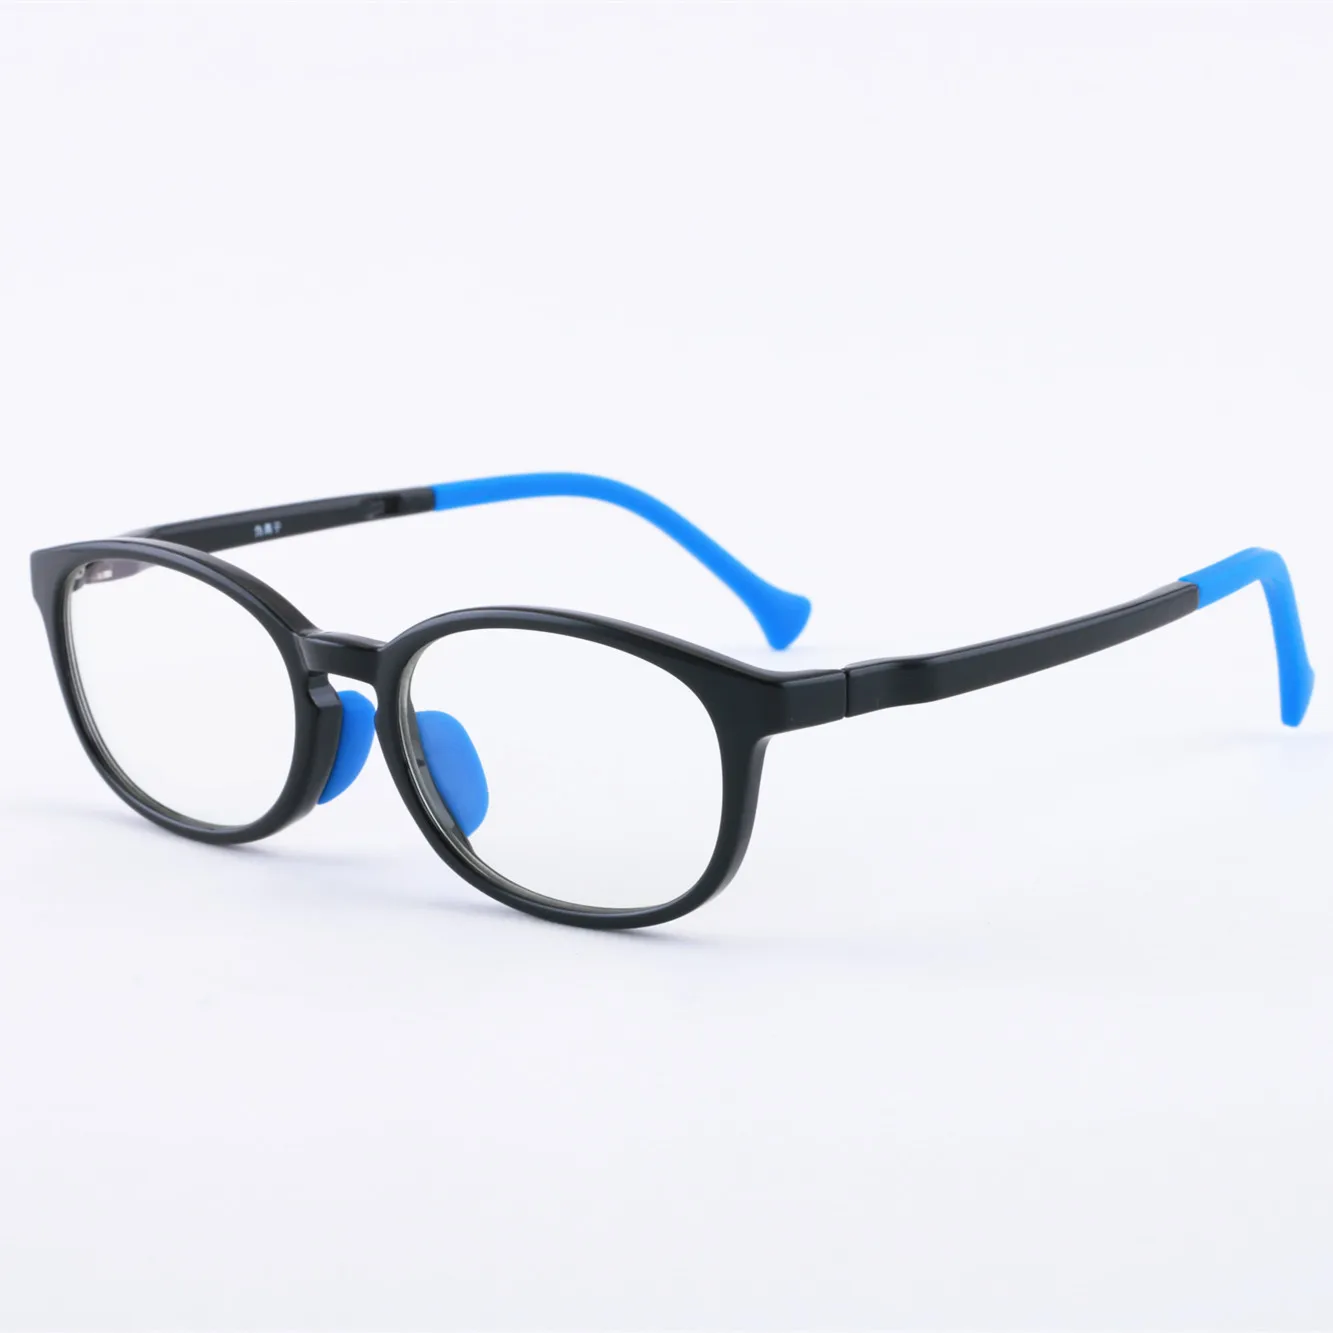 
round comfortable silicone High quality tr90 Anion glasses kids anti blue light glasses 